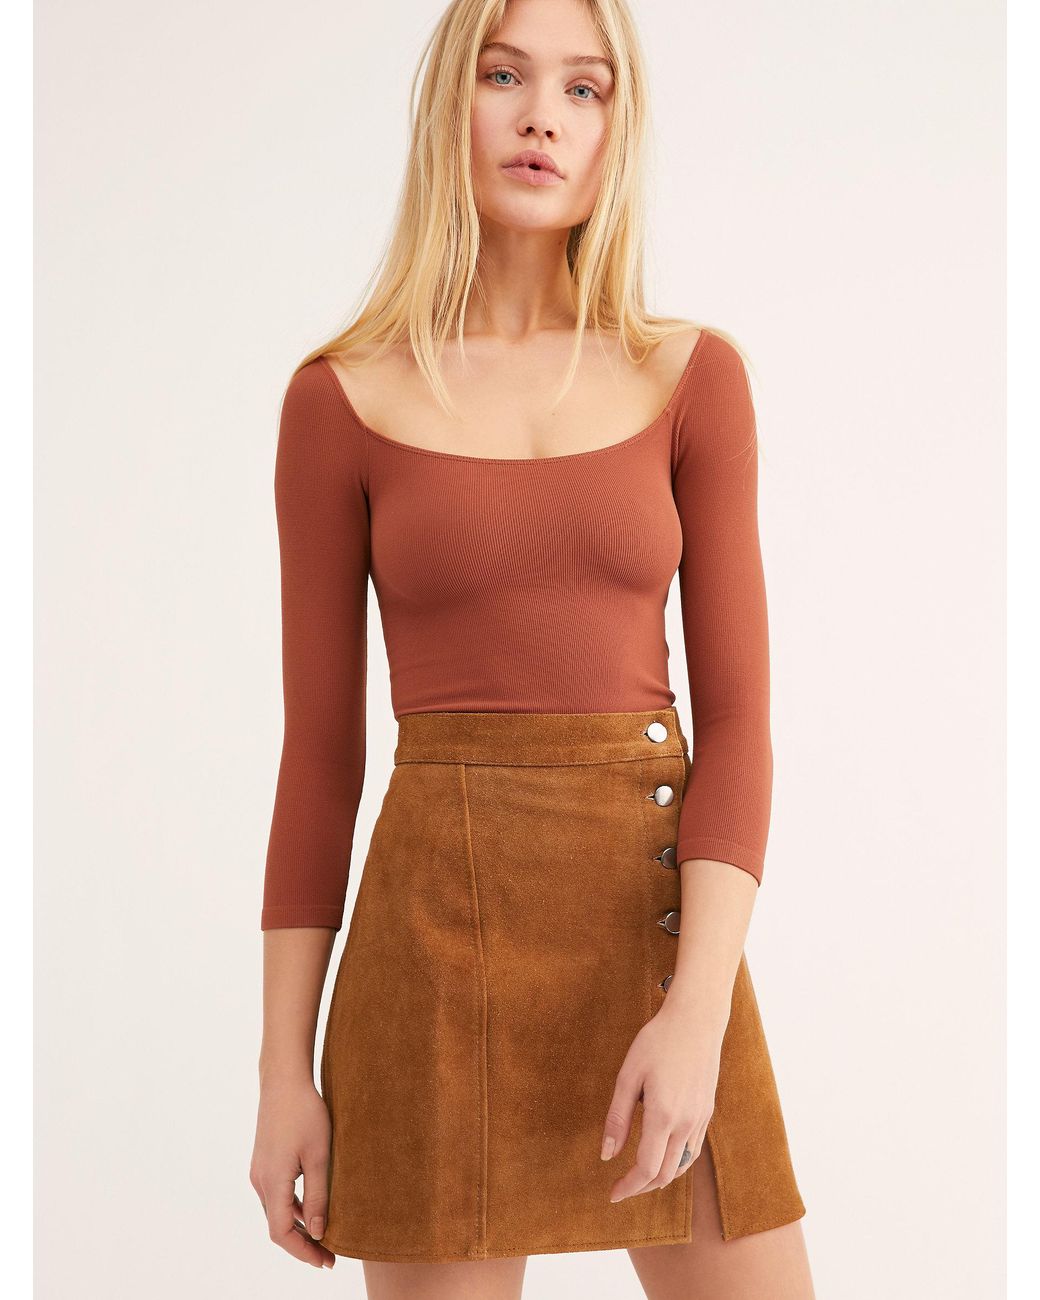 Free People Synthetic Square Neck 3/4 Sleeve Top in Rust (Brown) - Lyst